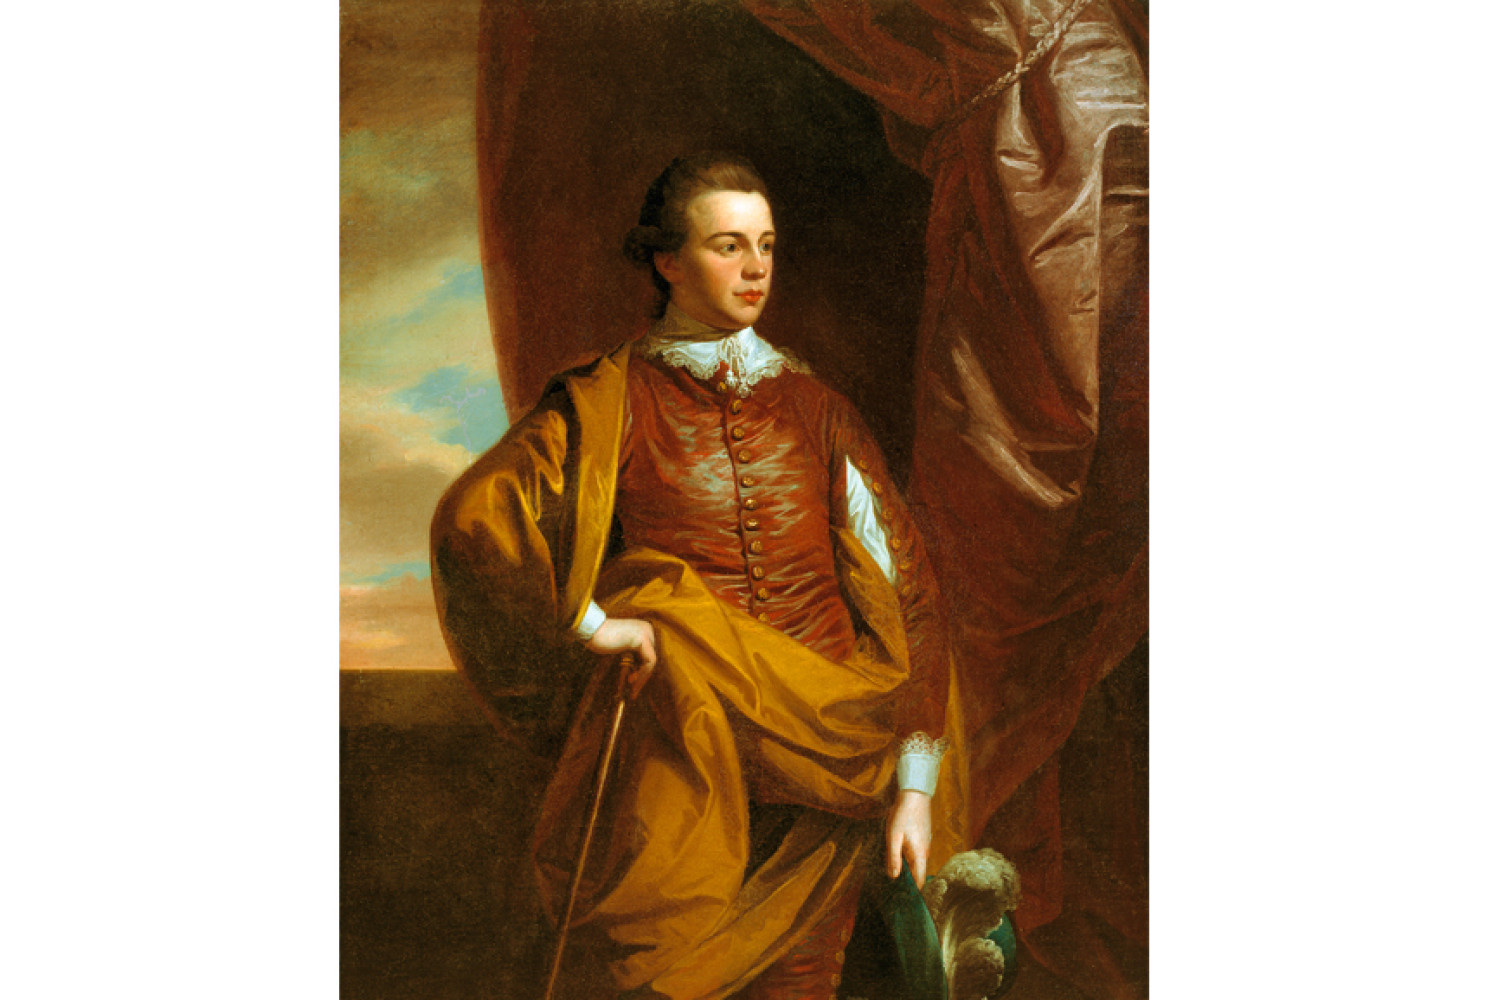 Thomas Middleton of The Oaks (1753 - 1797), 1770, by Benjamin West (American, 1738-1820); oil on canvas; 51 3/4 x 39 1/2 inches; Gift of Alicia Hopton Middleton; 1937.005.0014